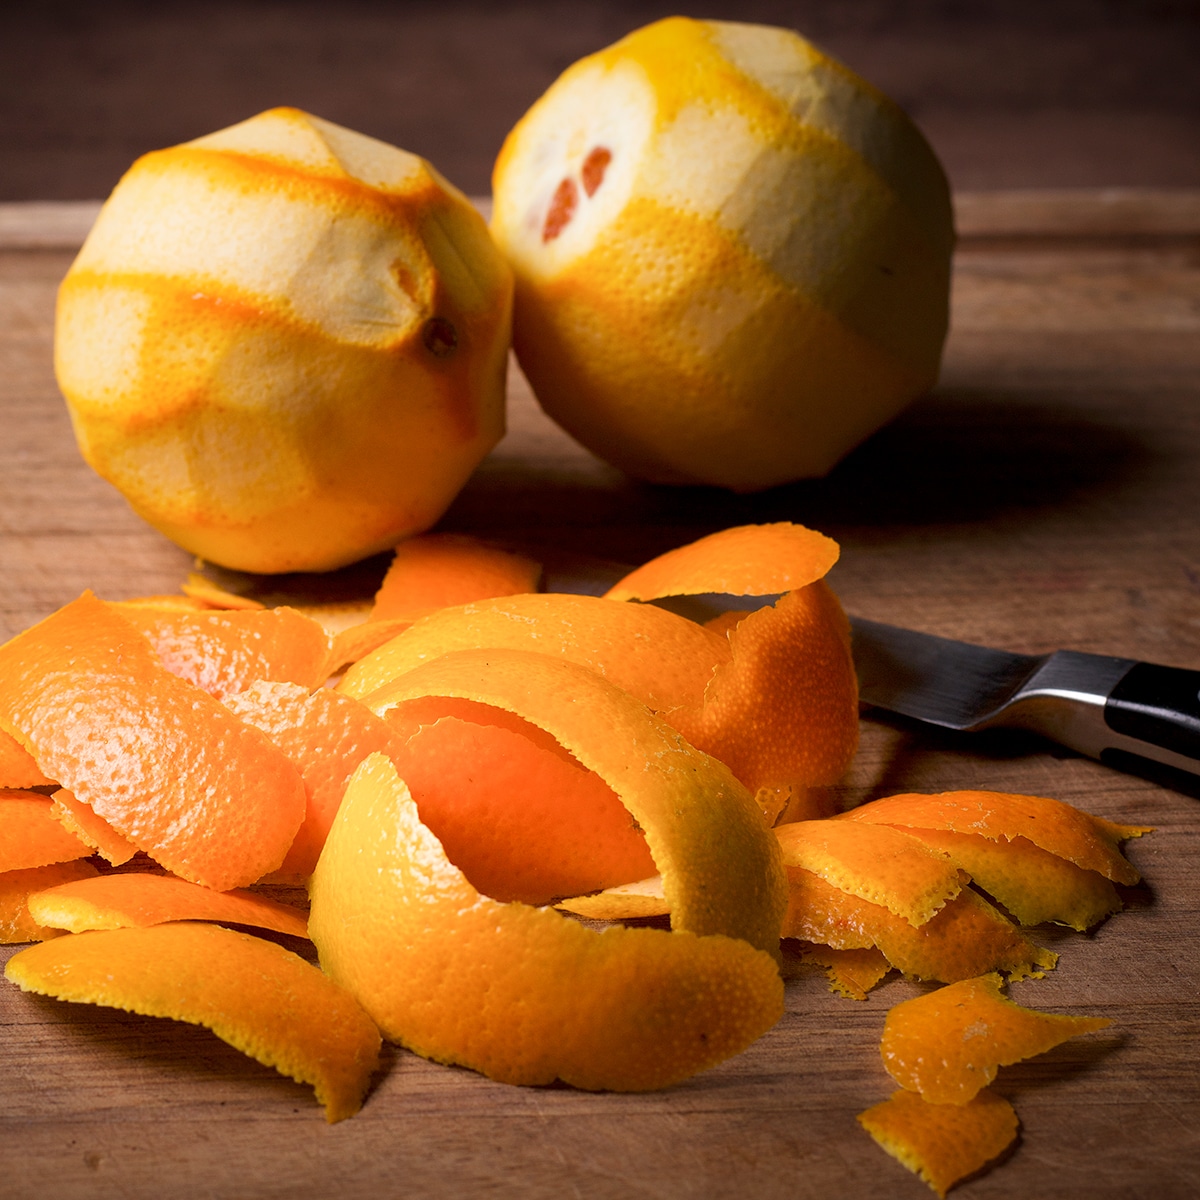 Cutting the peel from two oranges.